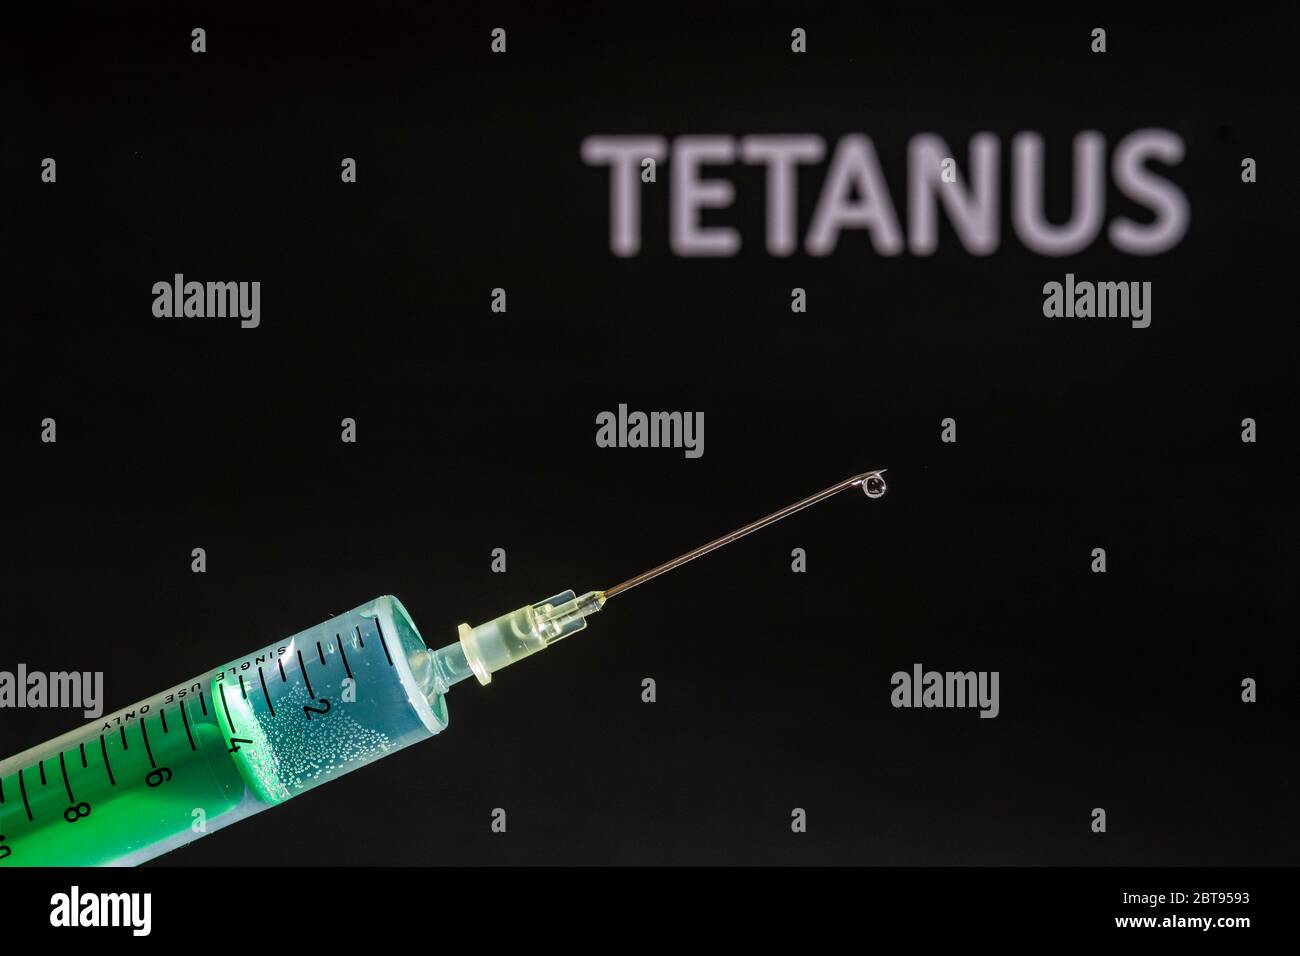 This photo illustration shows a disposable syringe with hypodermic needle, TETANUS written on a black board behind Stock Photo